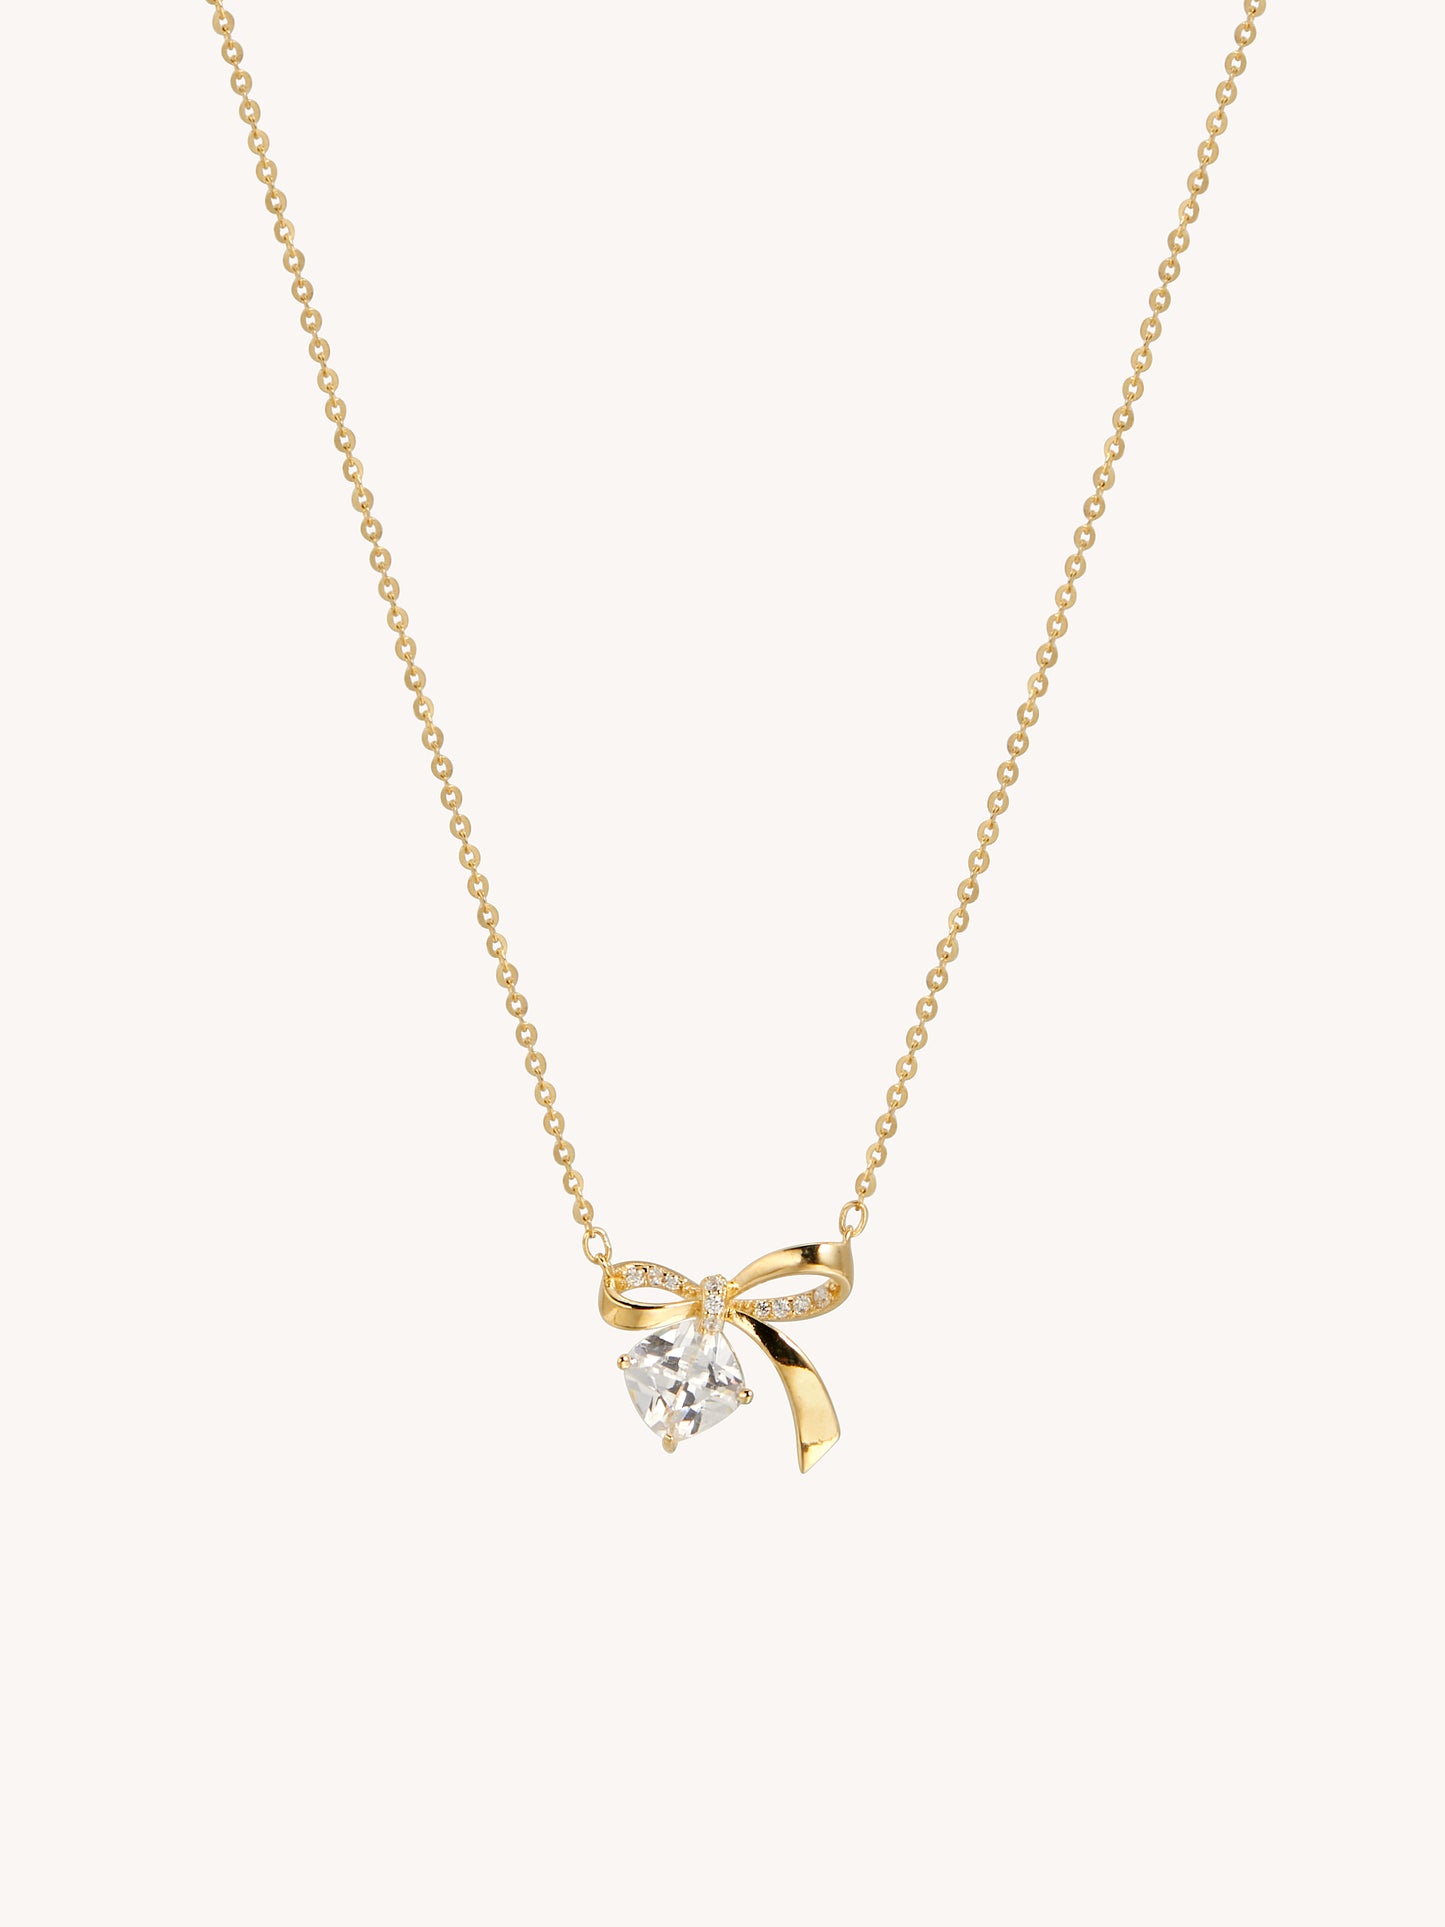 14K Gold Platted Dreamy Necklace